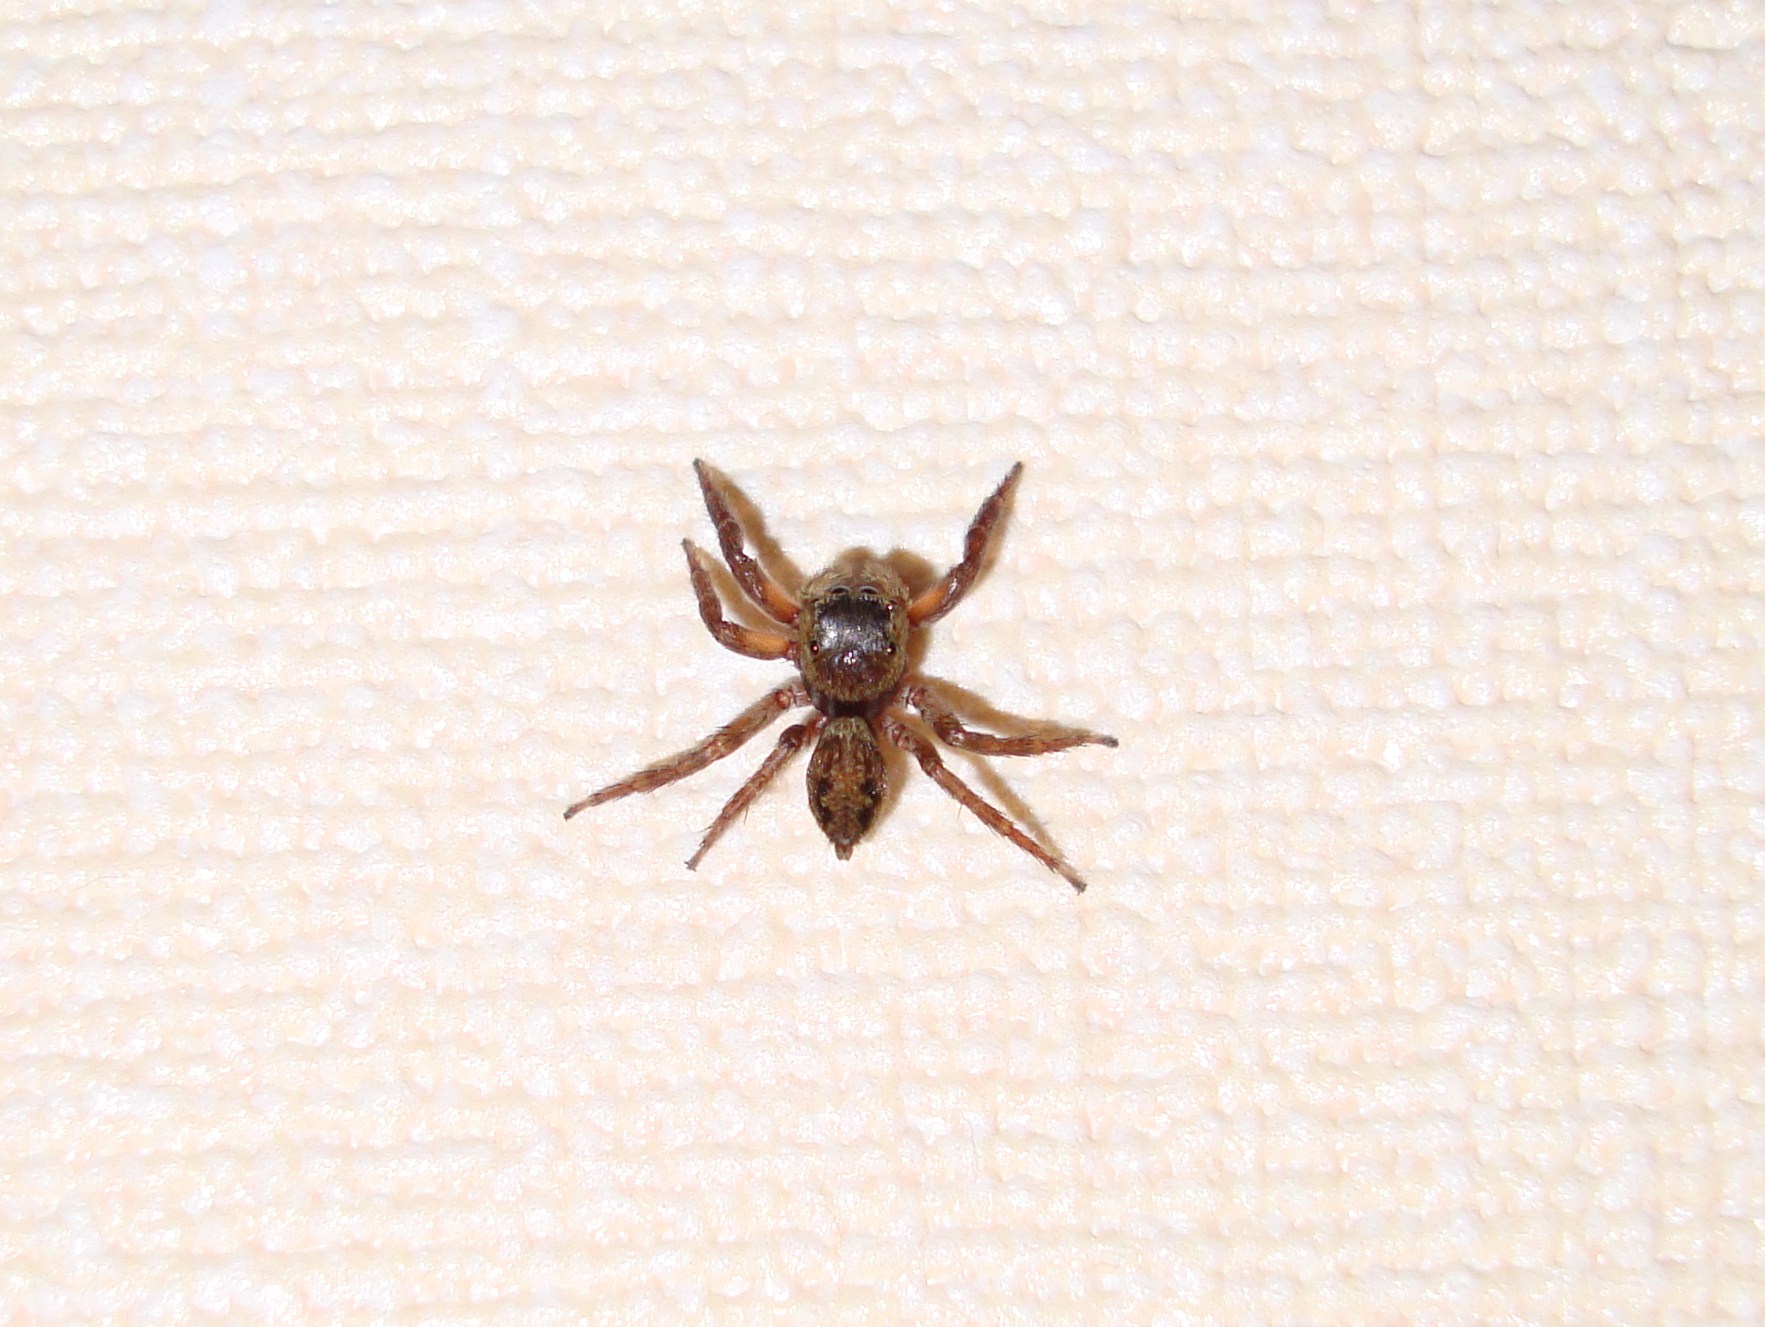 the tiny brown spider is on a cloth